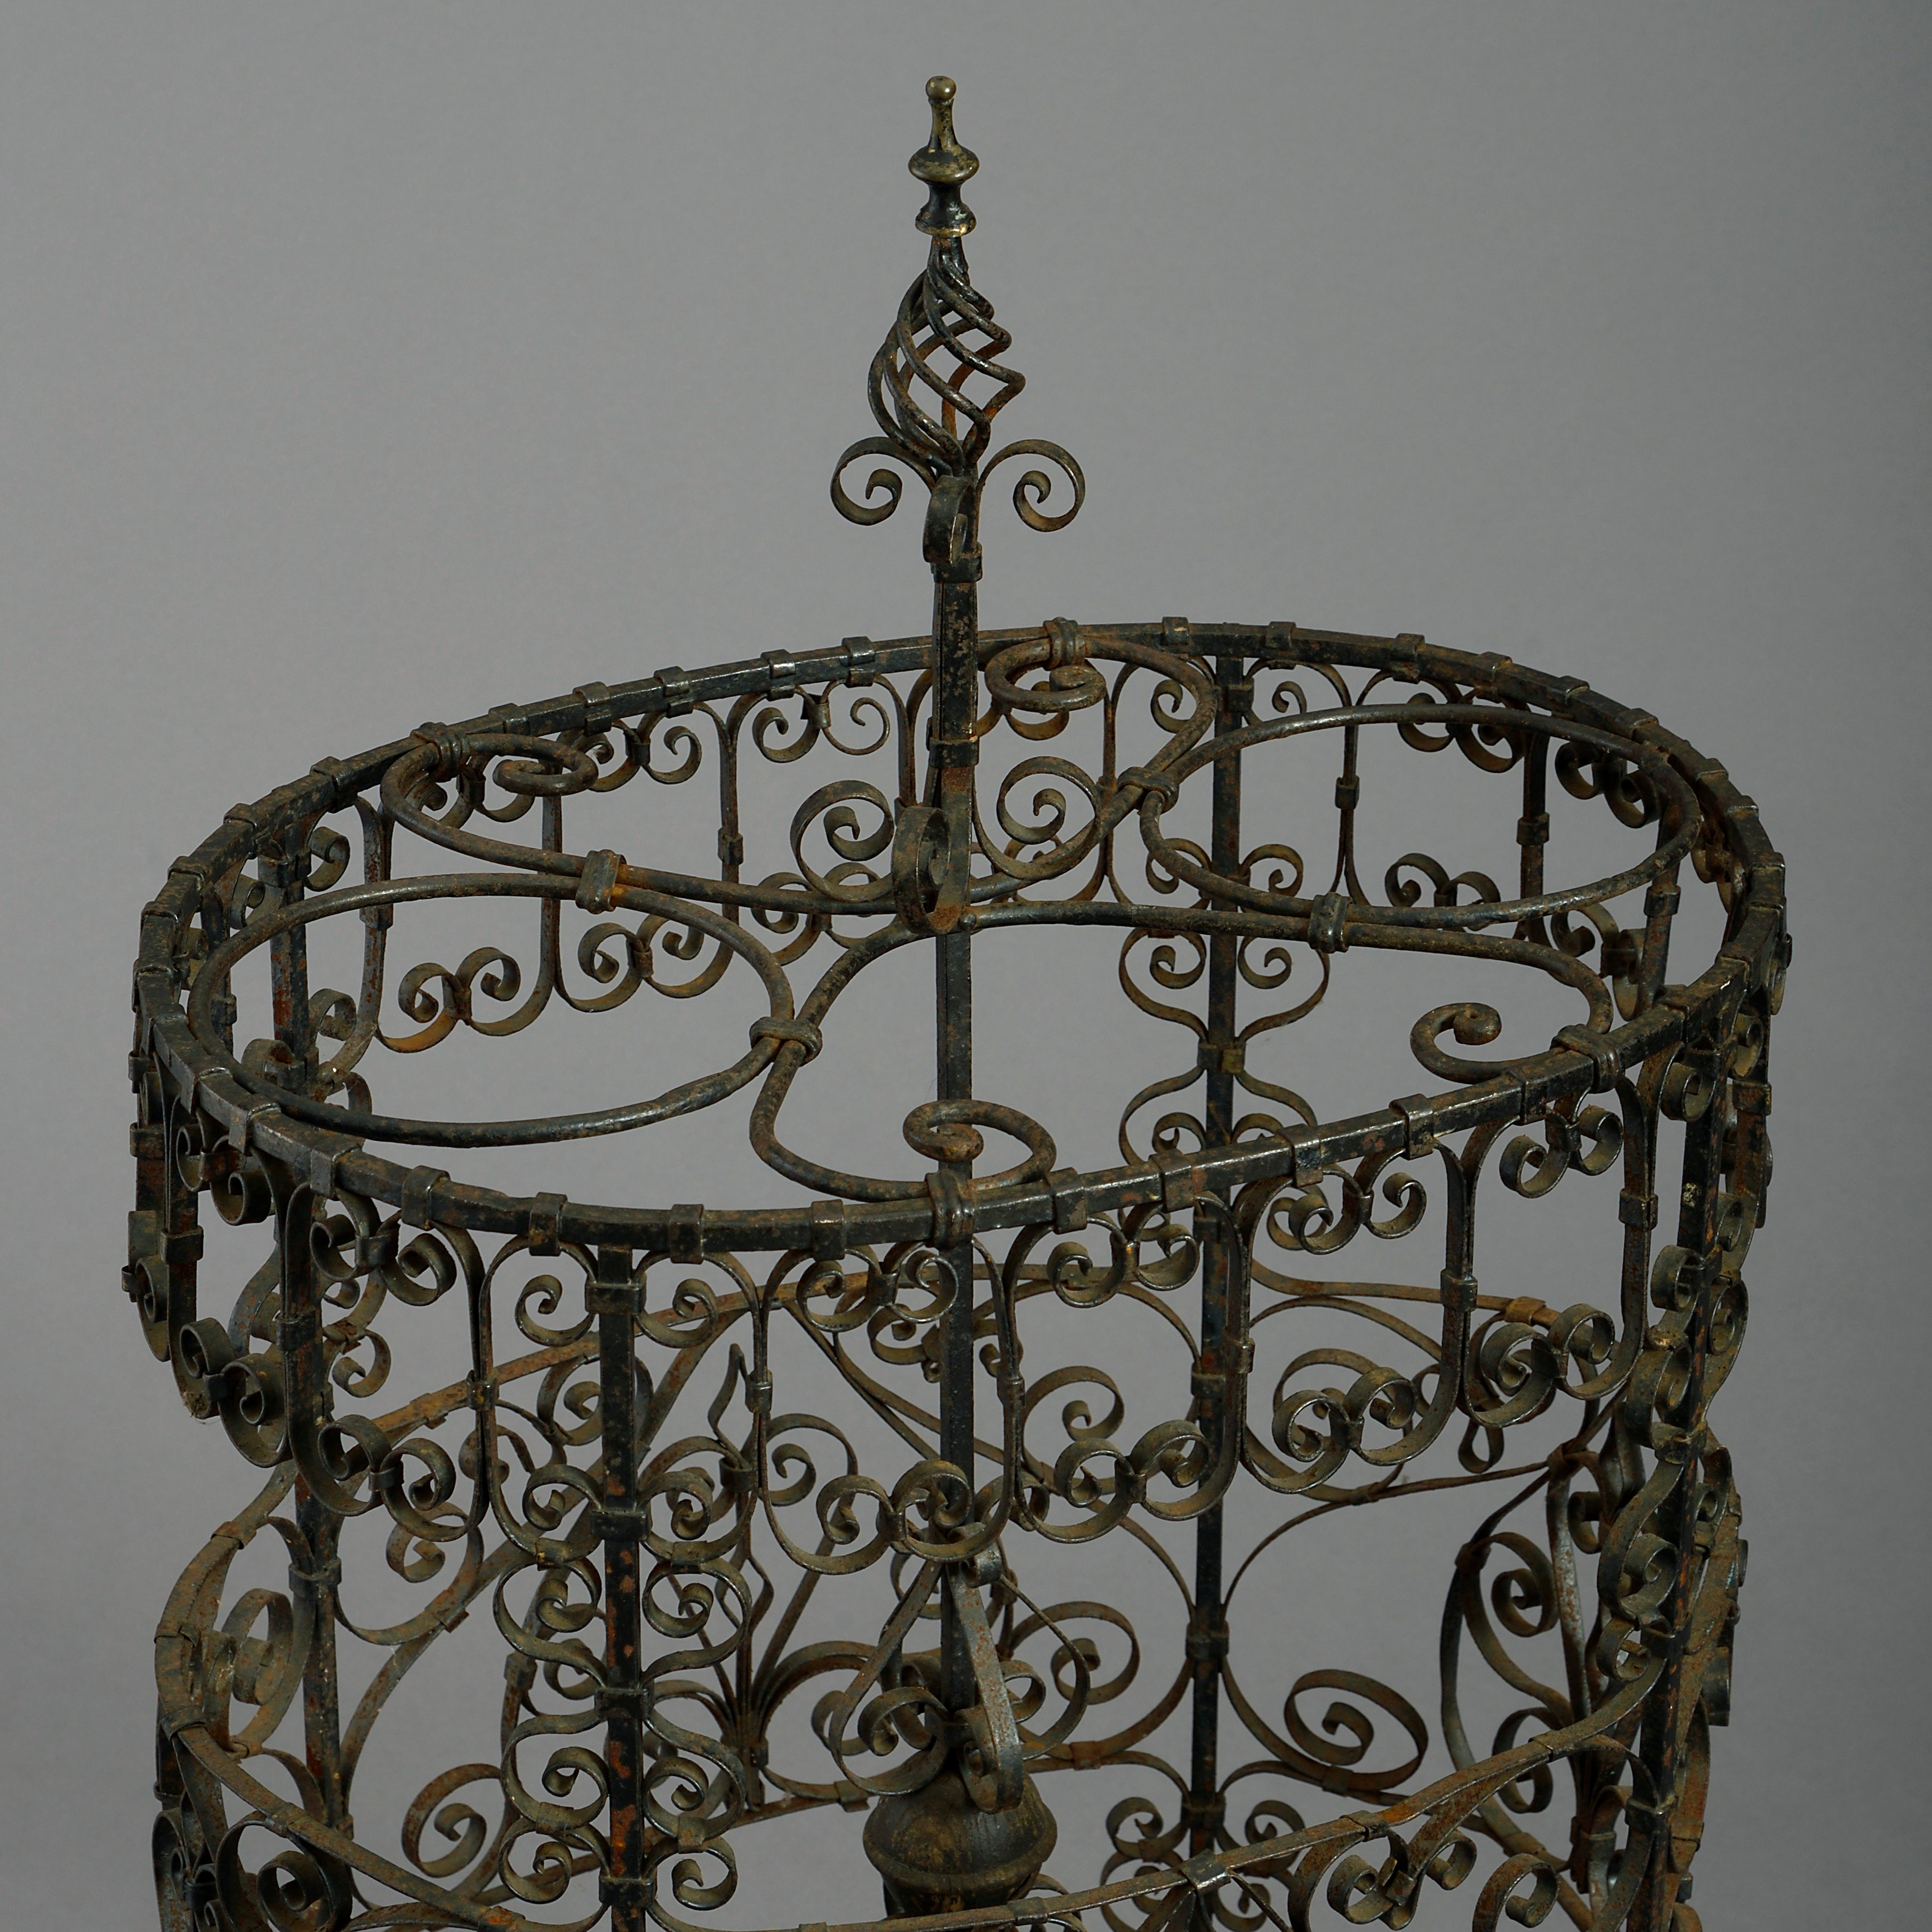 Cast 19th Century Wrought Iron Umbrella and Stick Stand